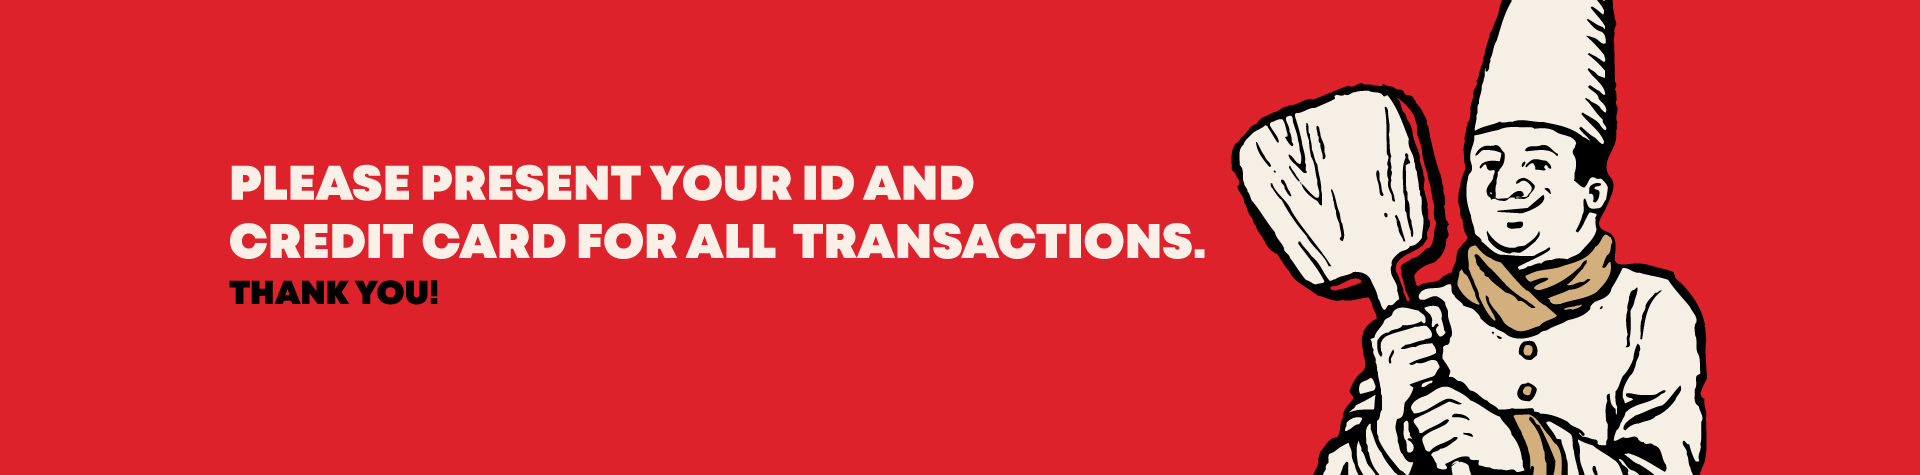 Please present your ID and credit card for all transactions. Thank you!